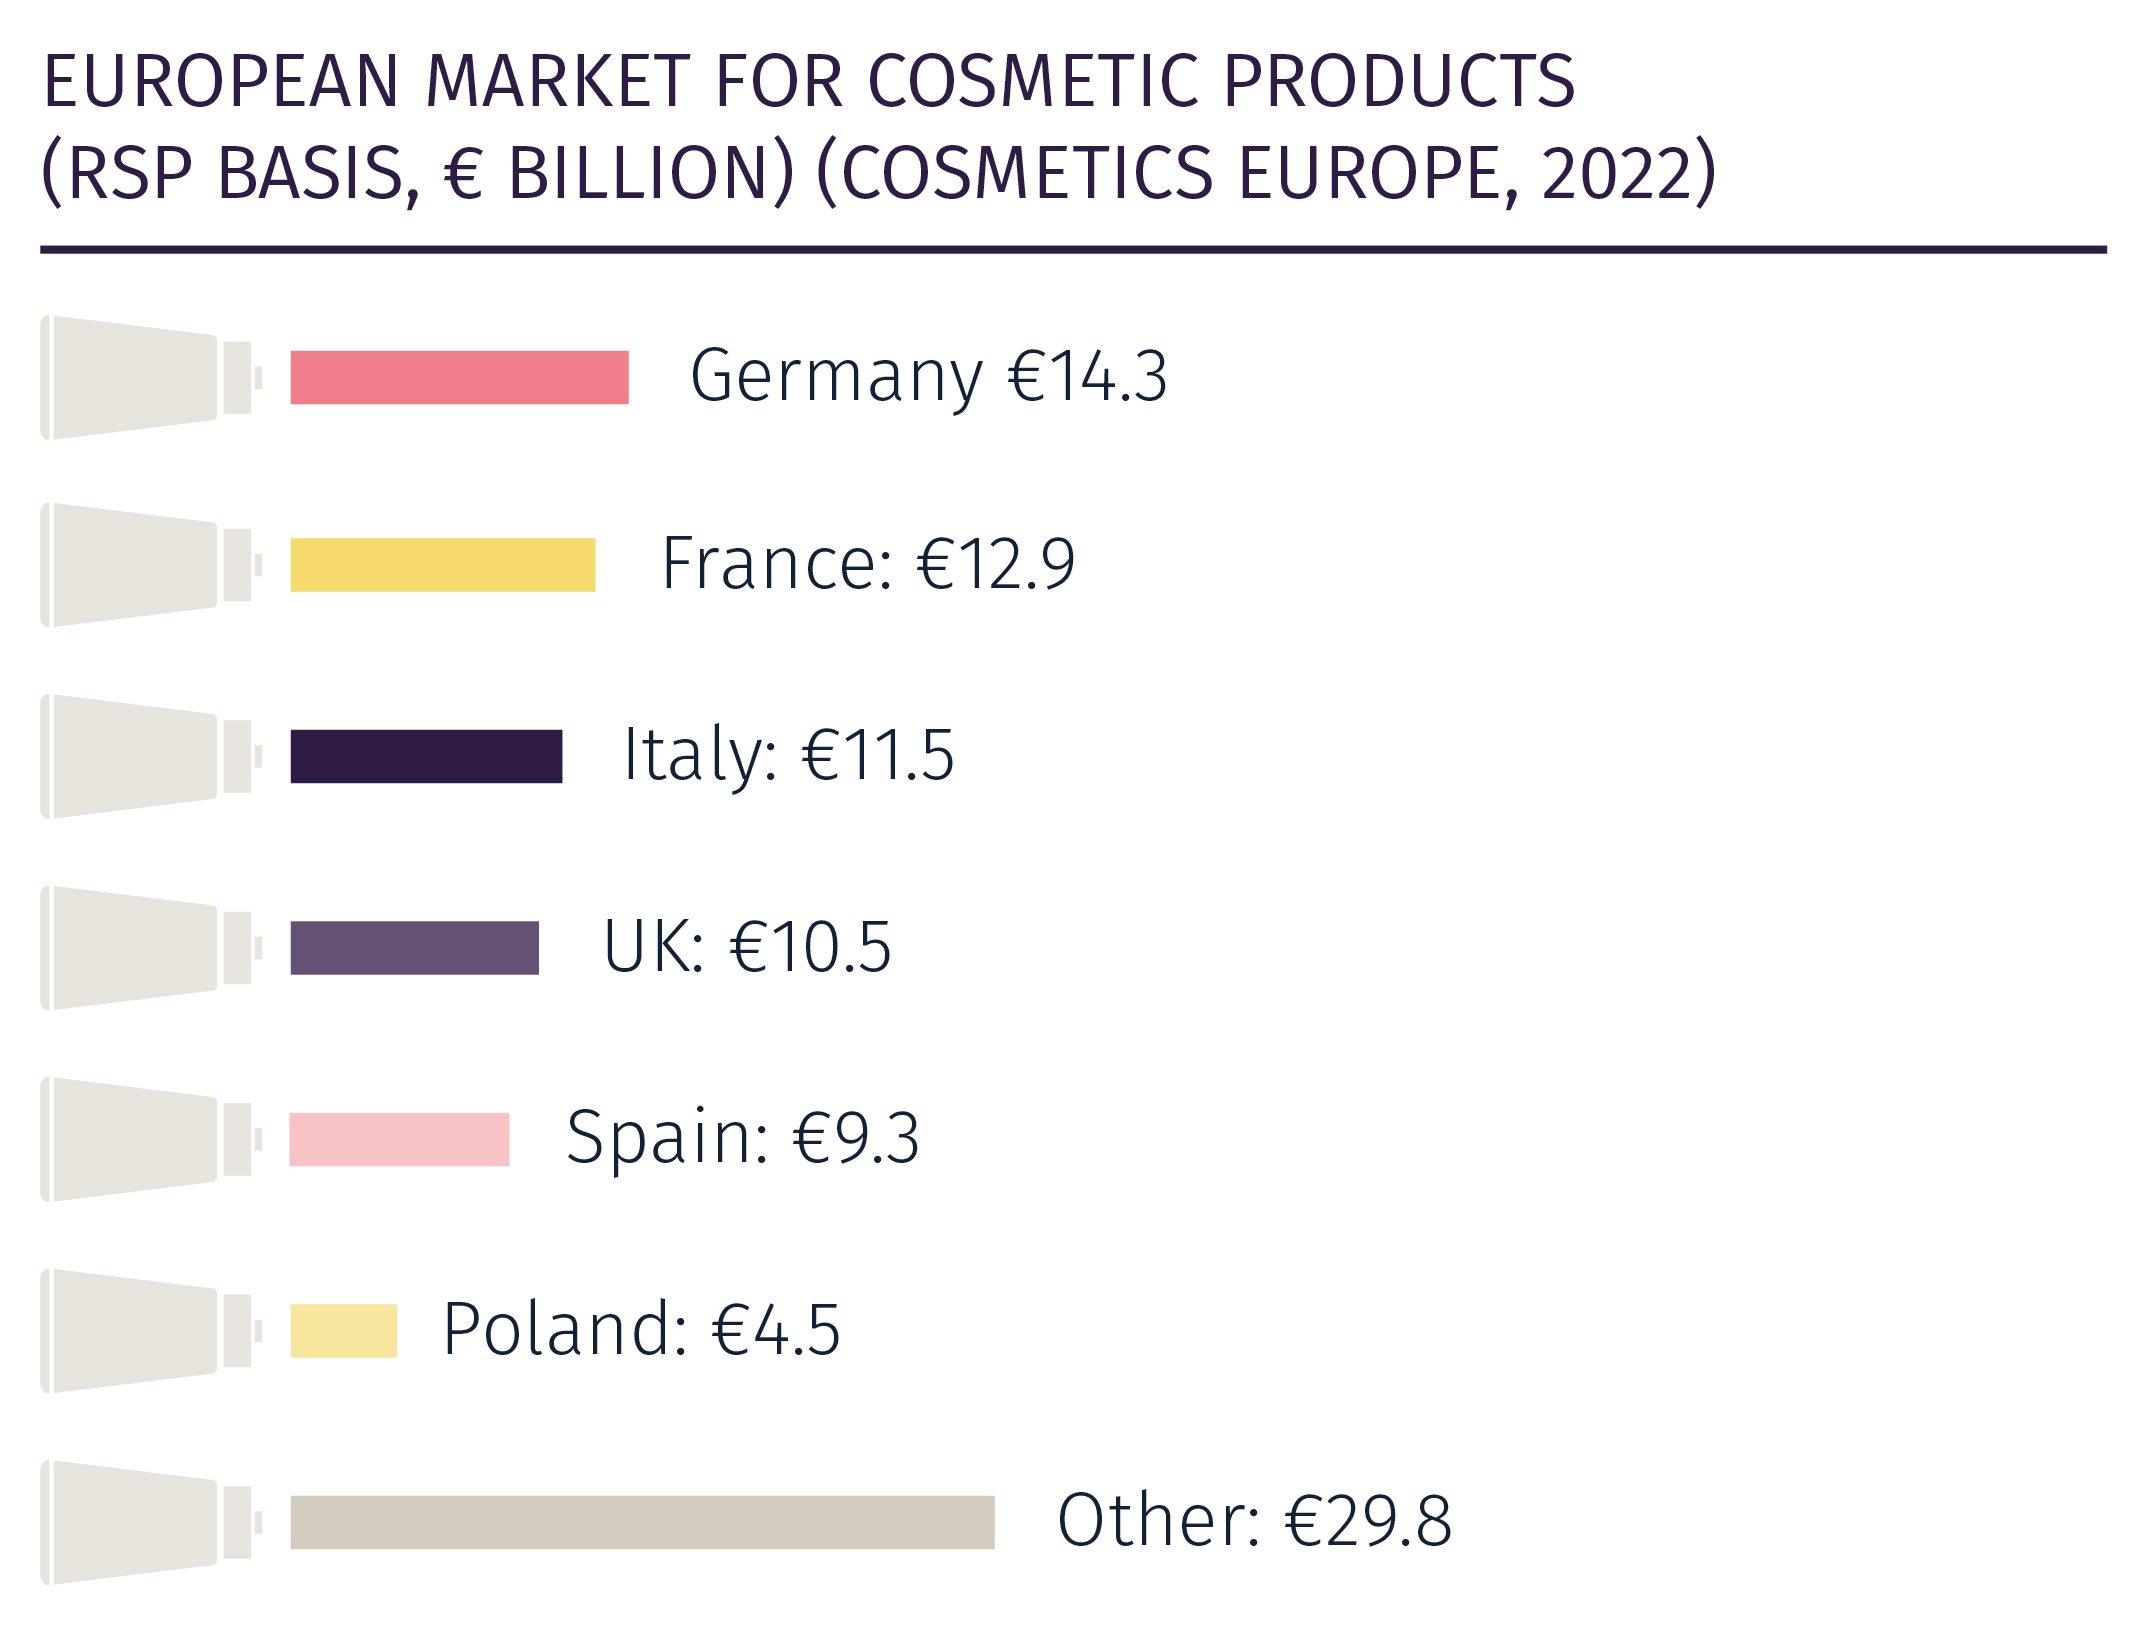 China's Cosmetics and Personal Care Market: Trends and Outlook